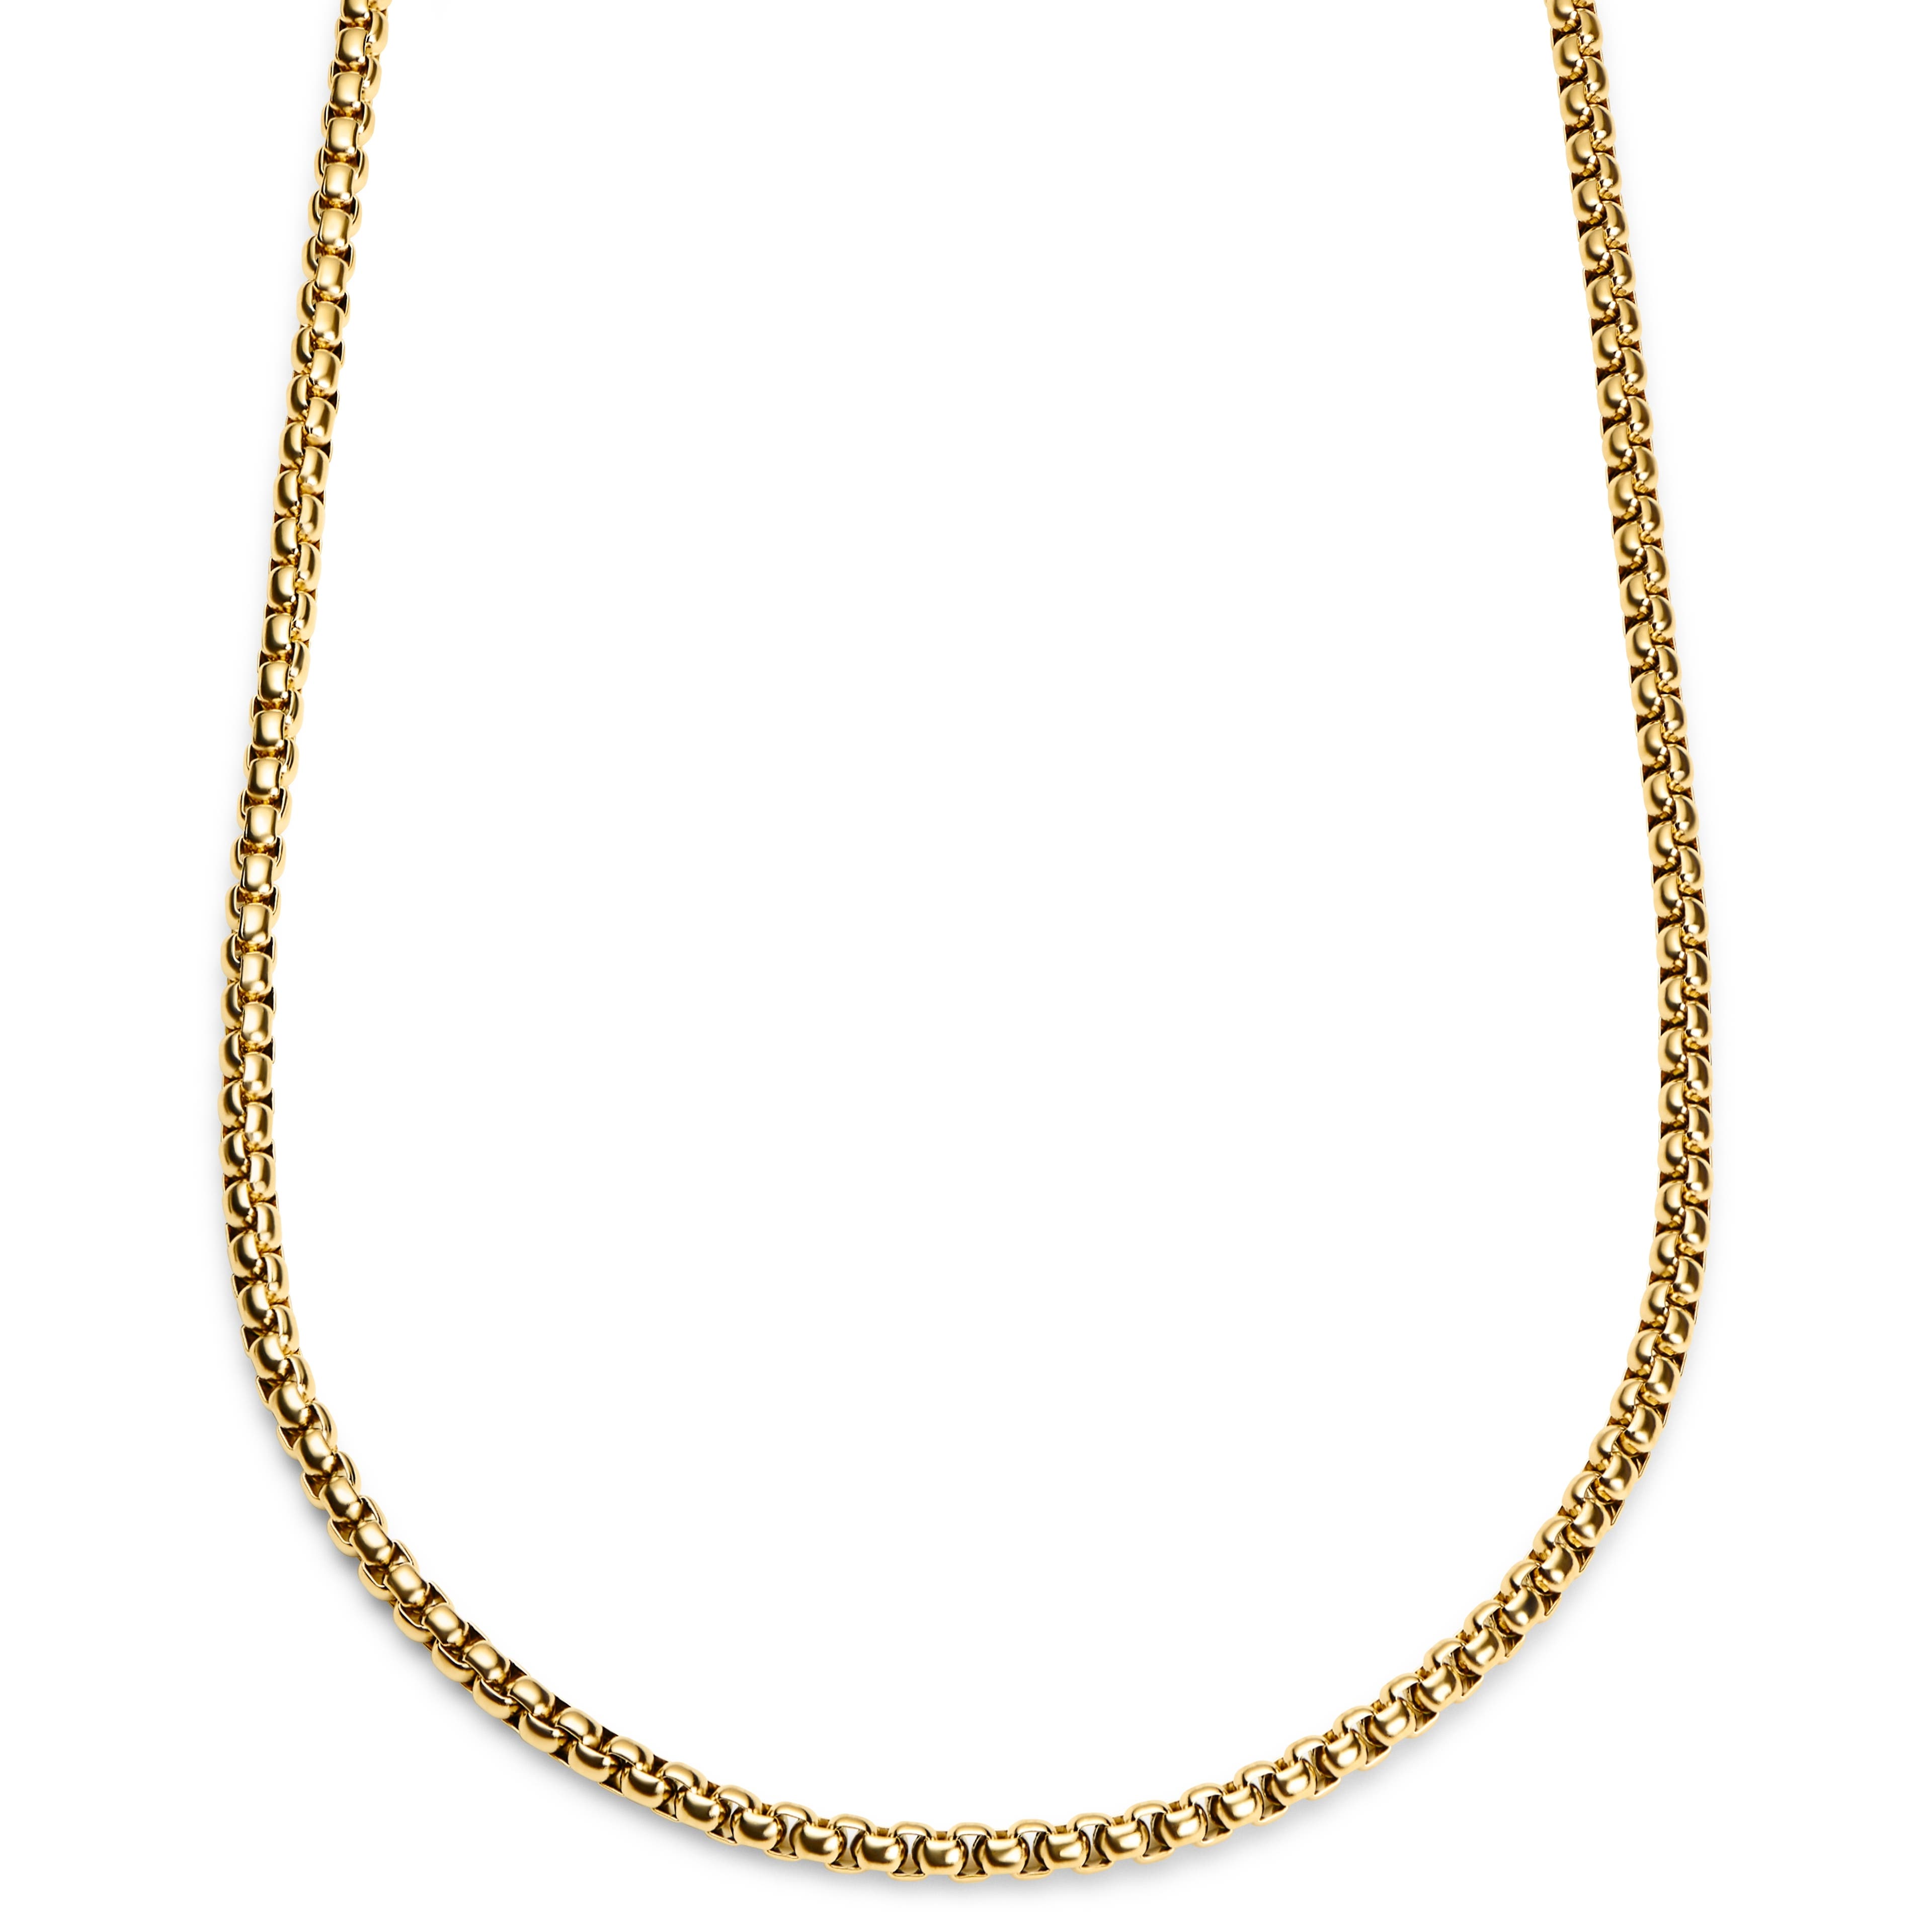 Essentials | 5 mm Gold-Tone Curved Box Chain Necklace